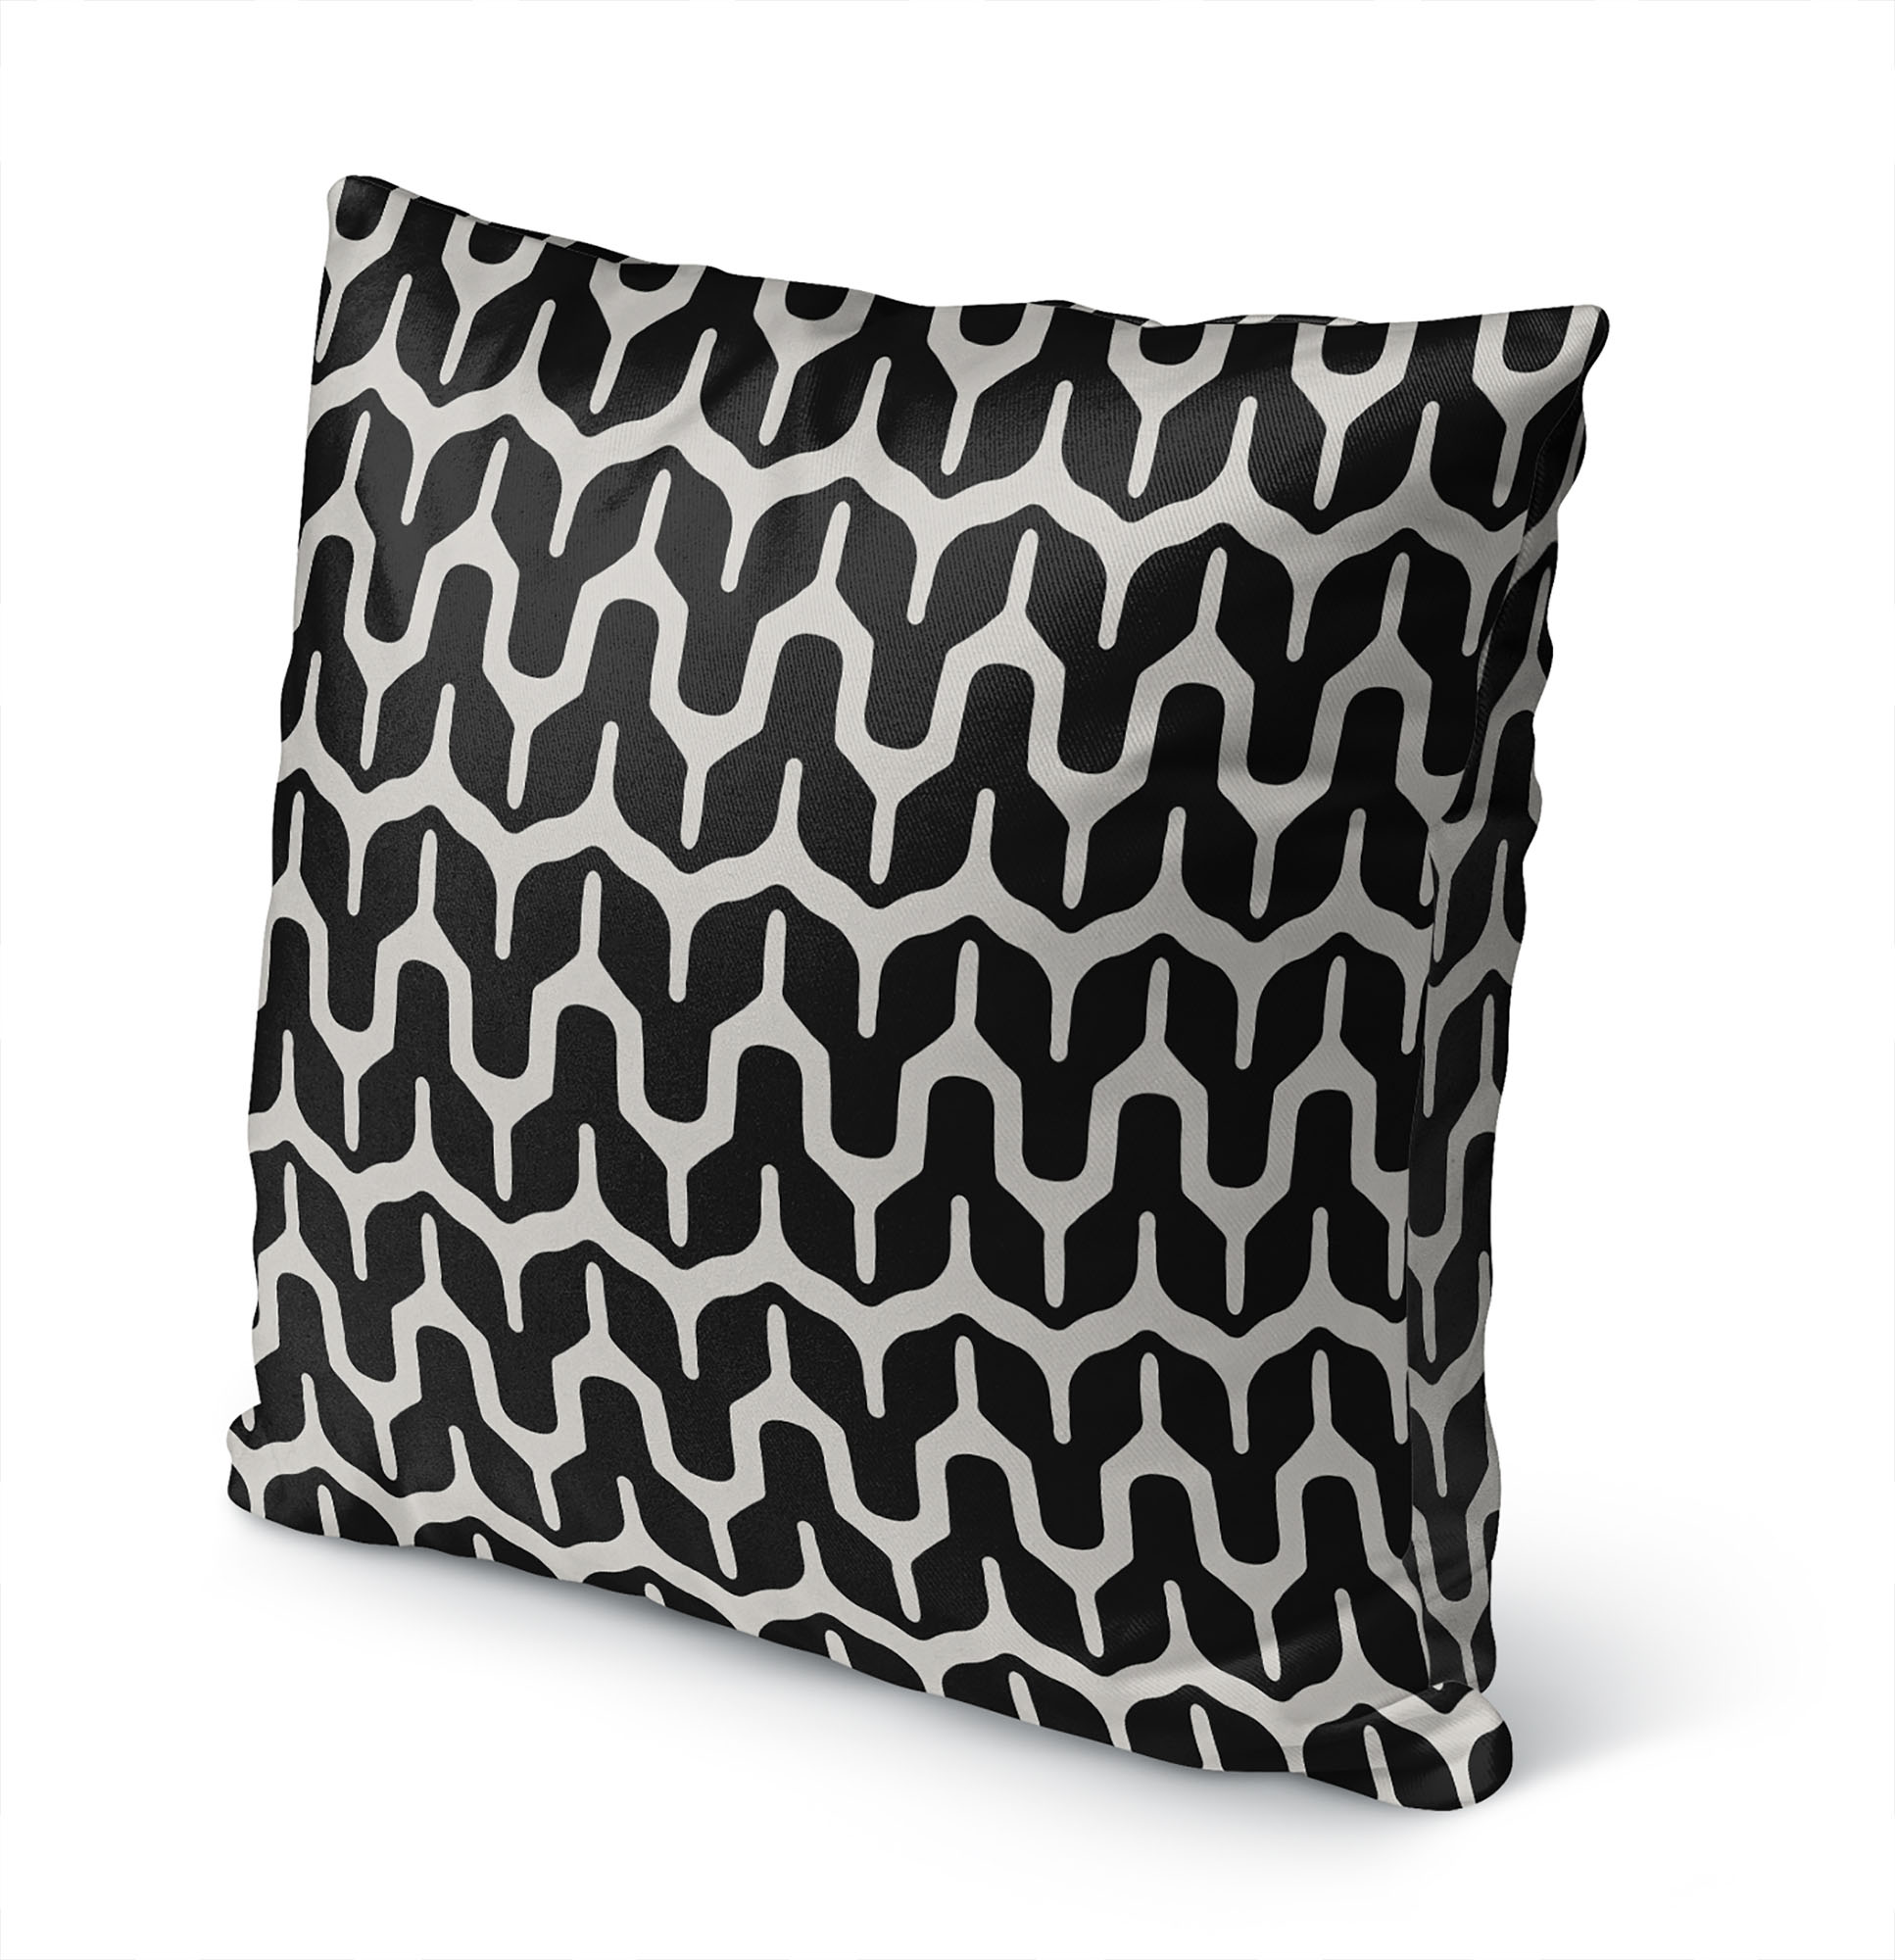 Maria Black and Beige Outdoor Pillow by Kavka Designs - image 3 of 5